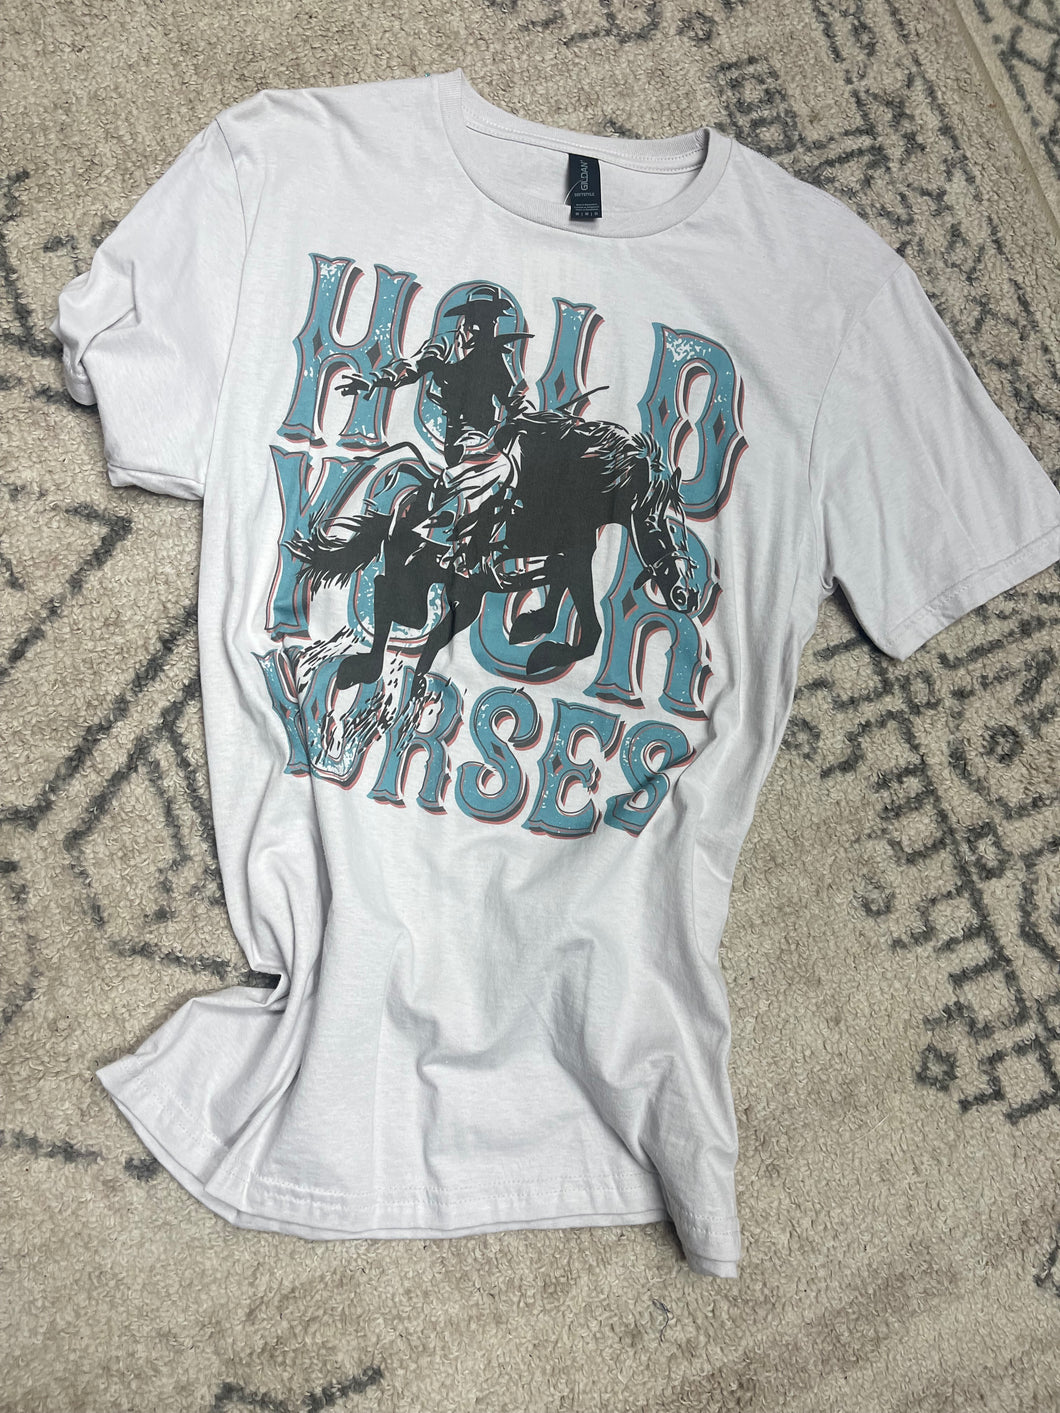 Hold Your Horses Tee - Cheekys